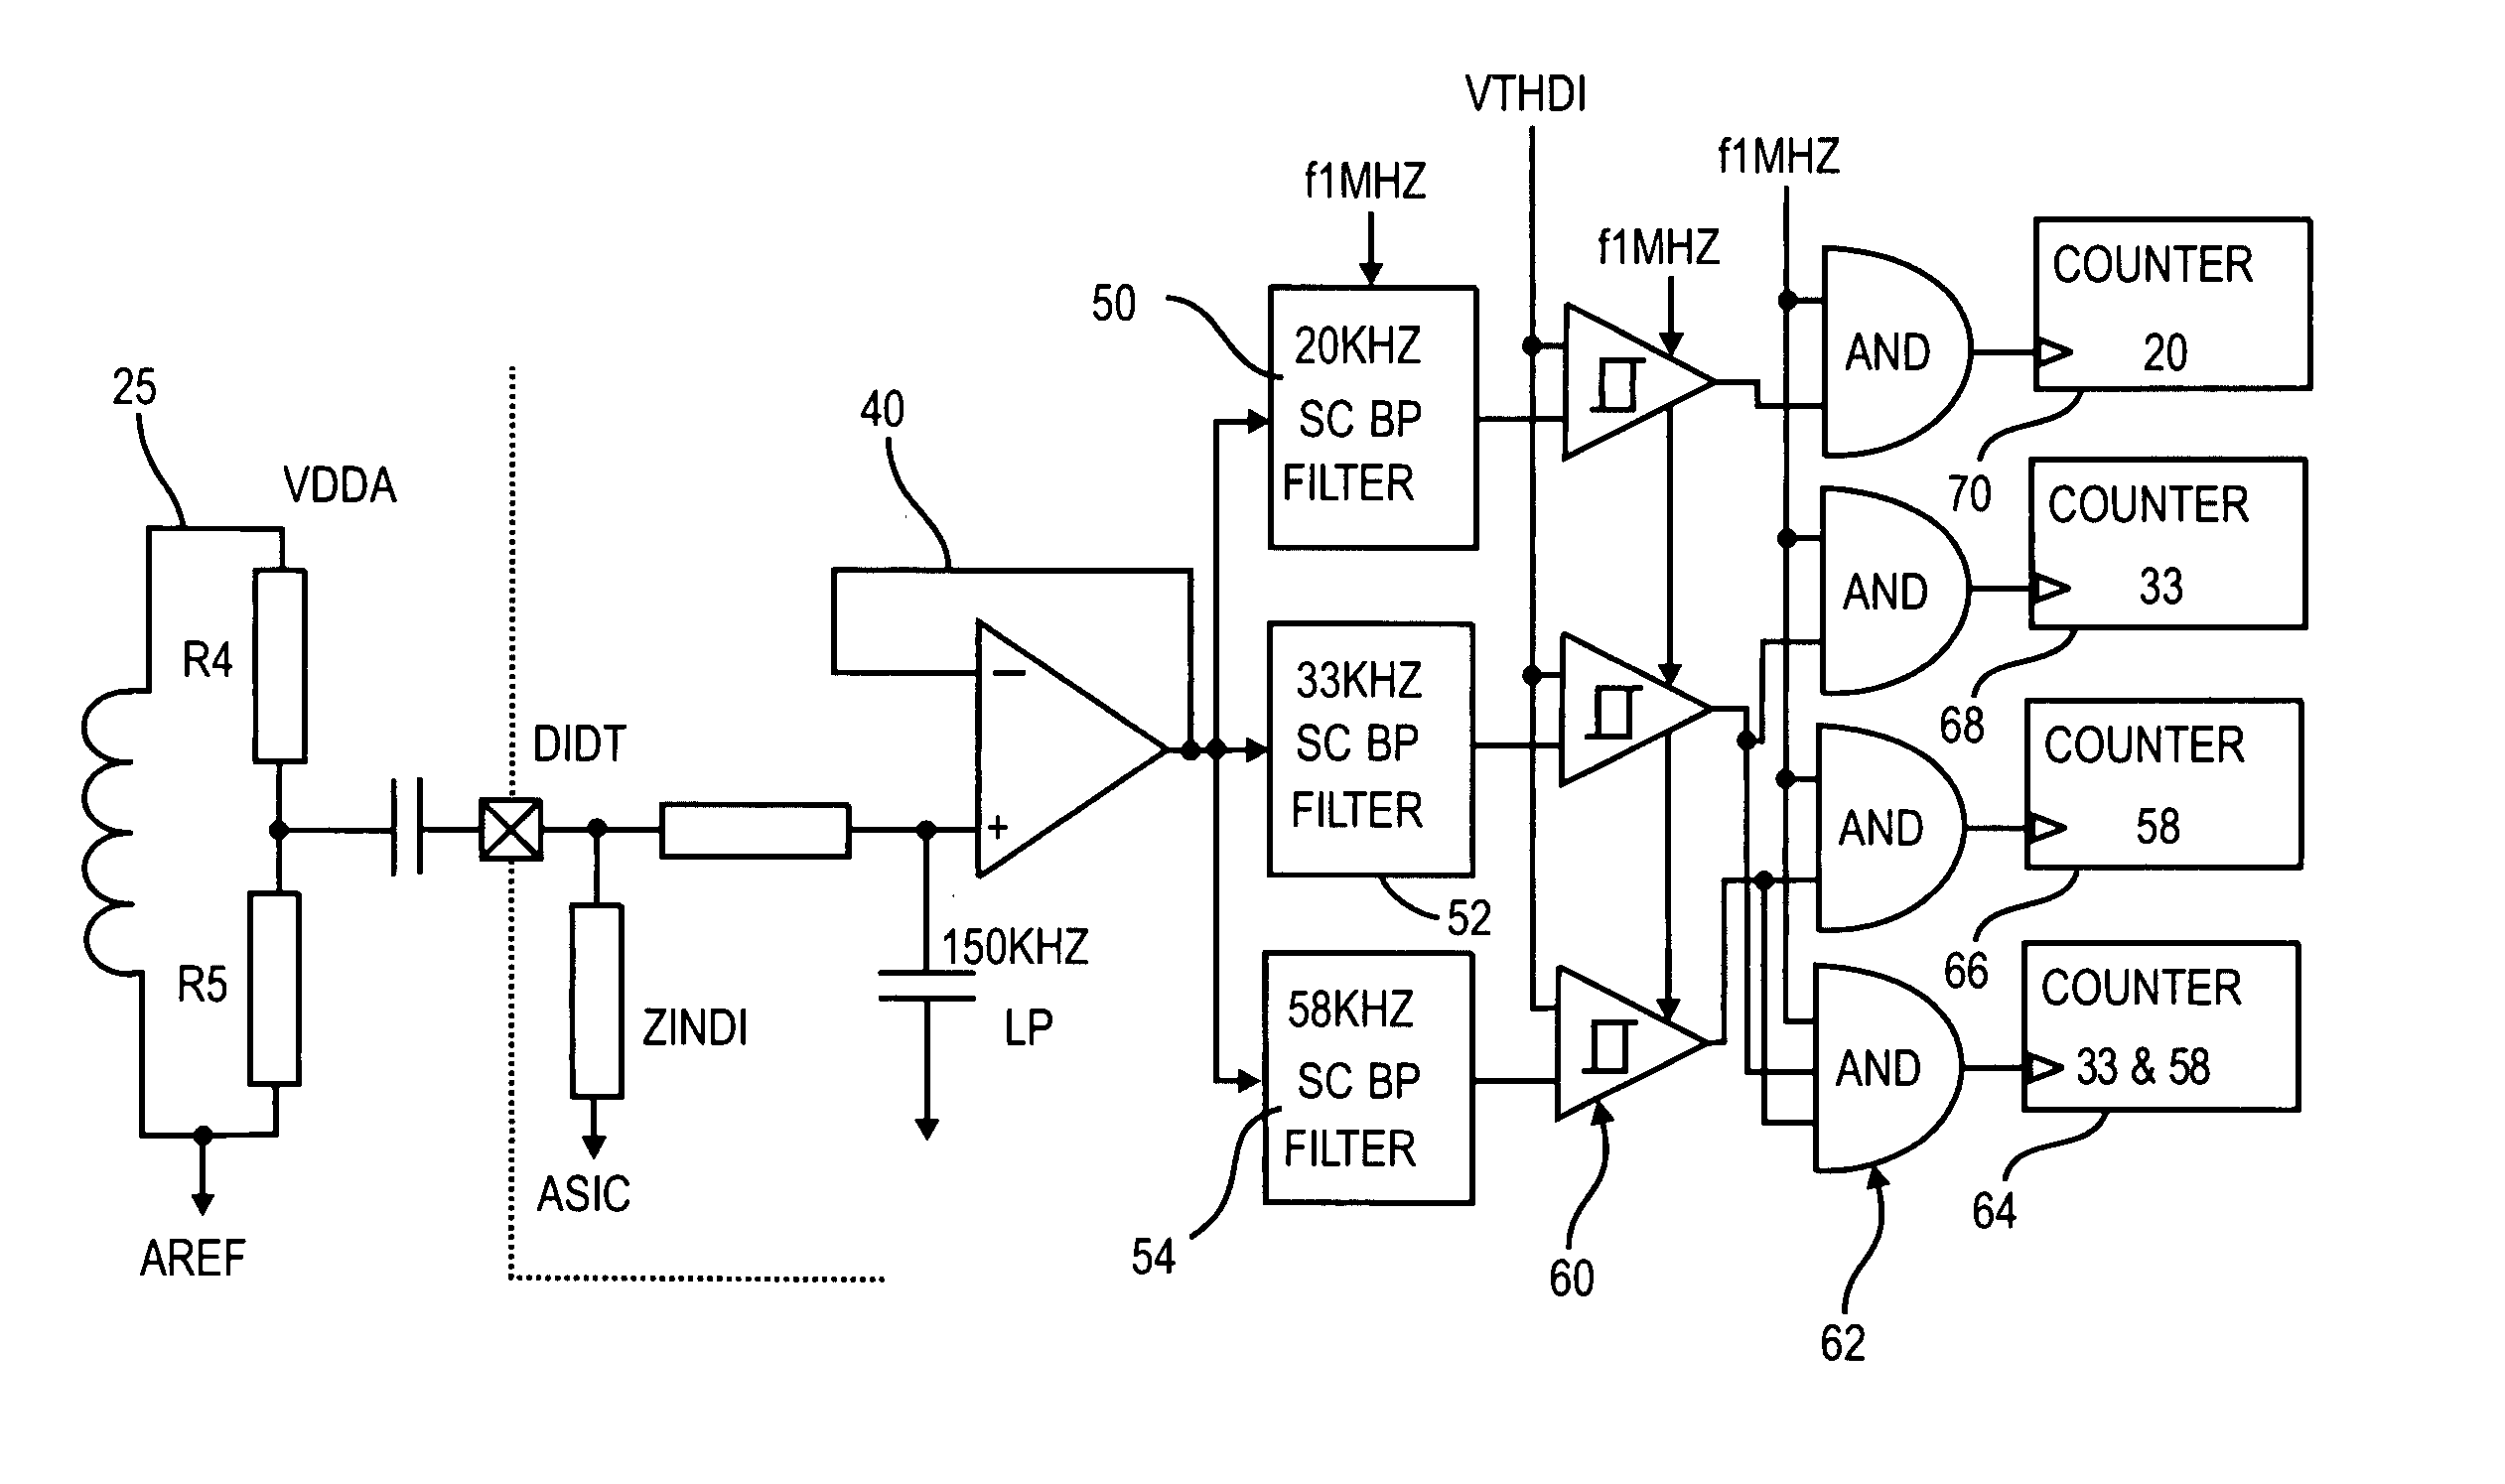 Load recognition and series arc detection using load current/line voltage normalization algorithms